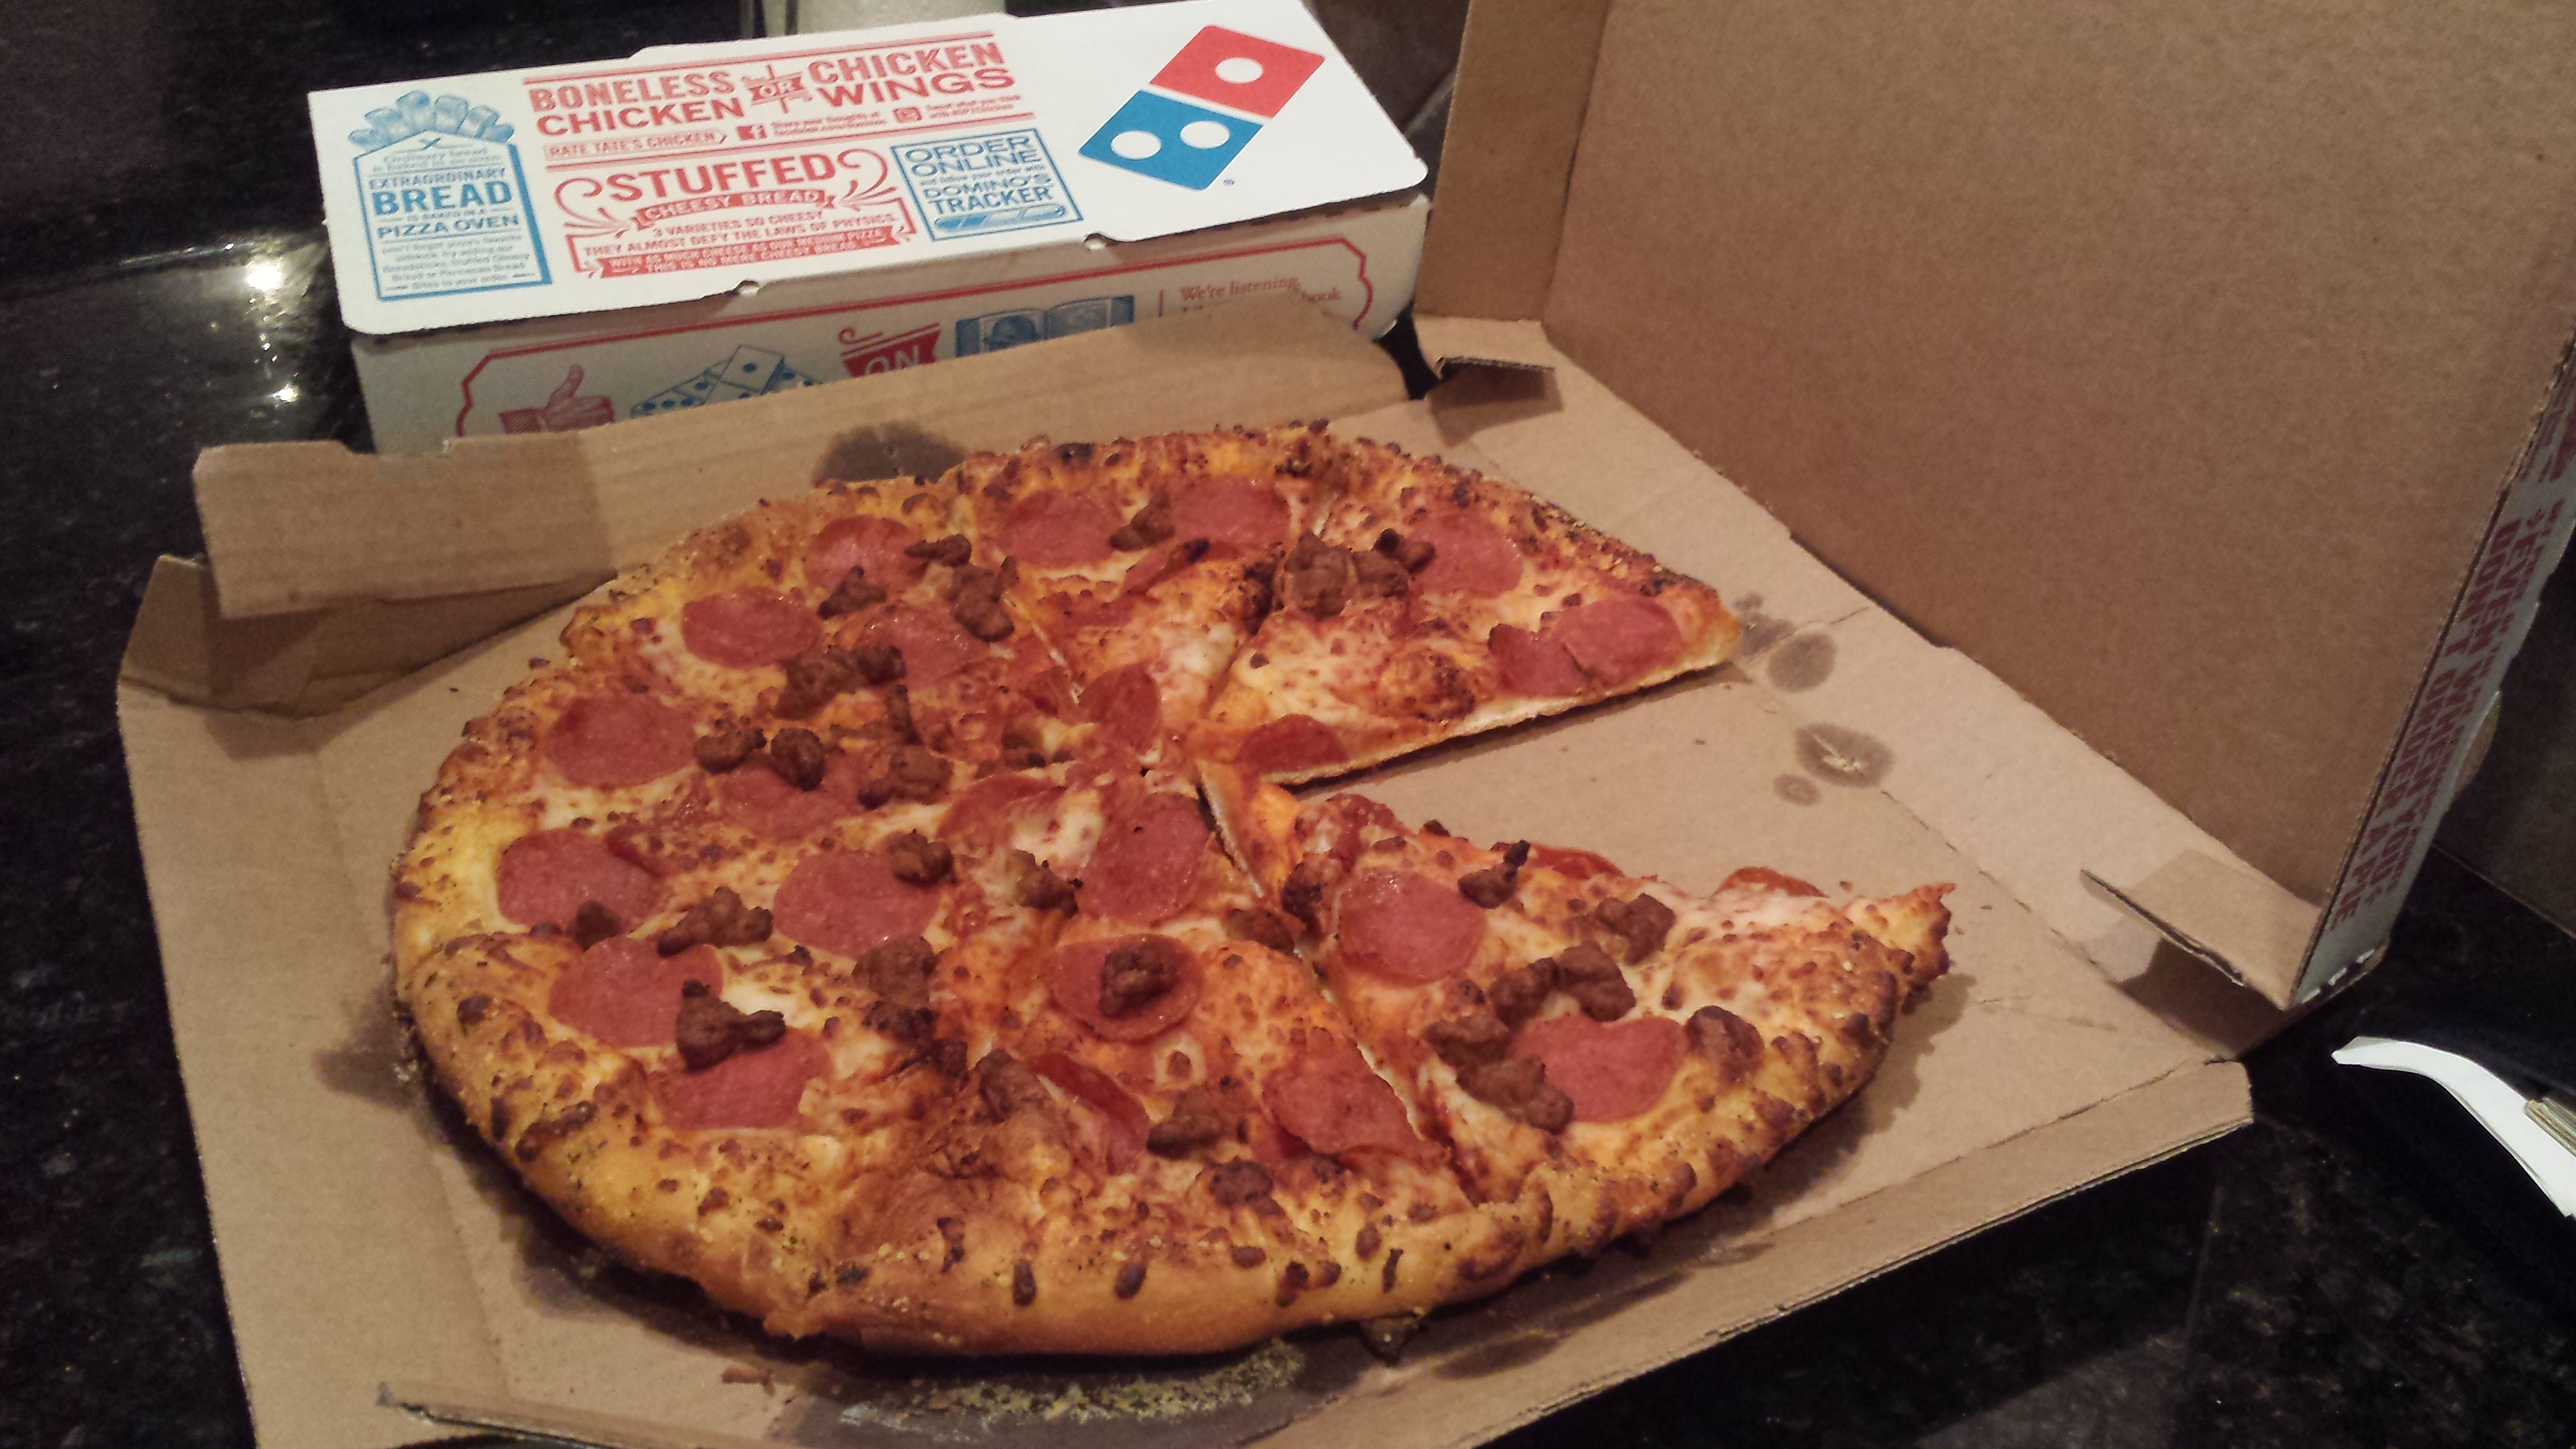 I've always had excellent service and pizza from Dominos until... 